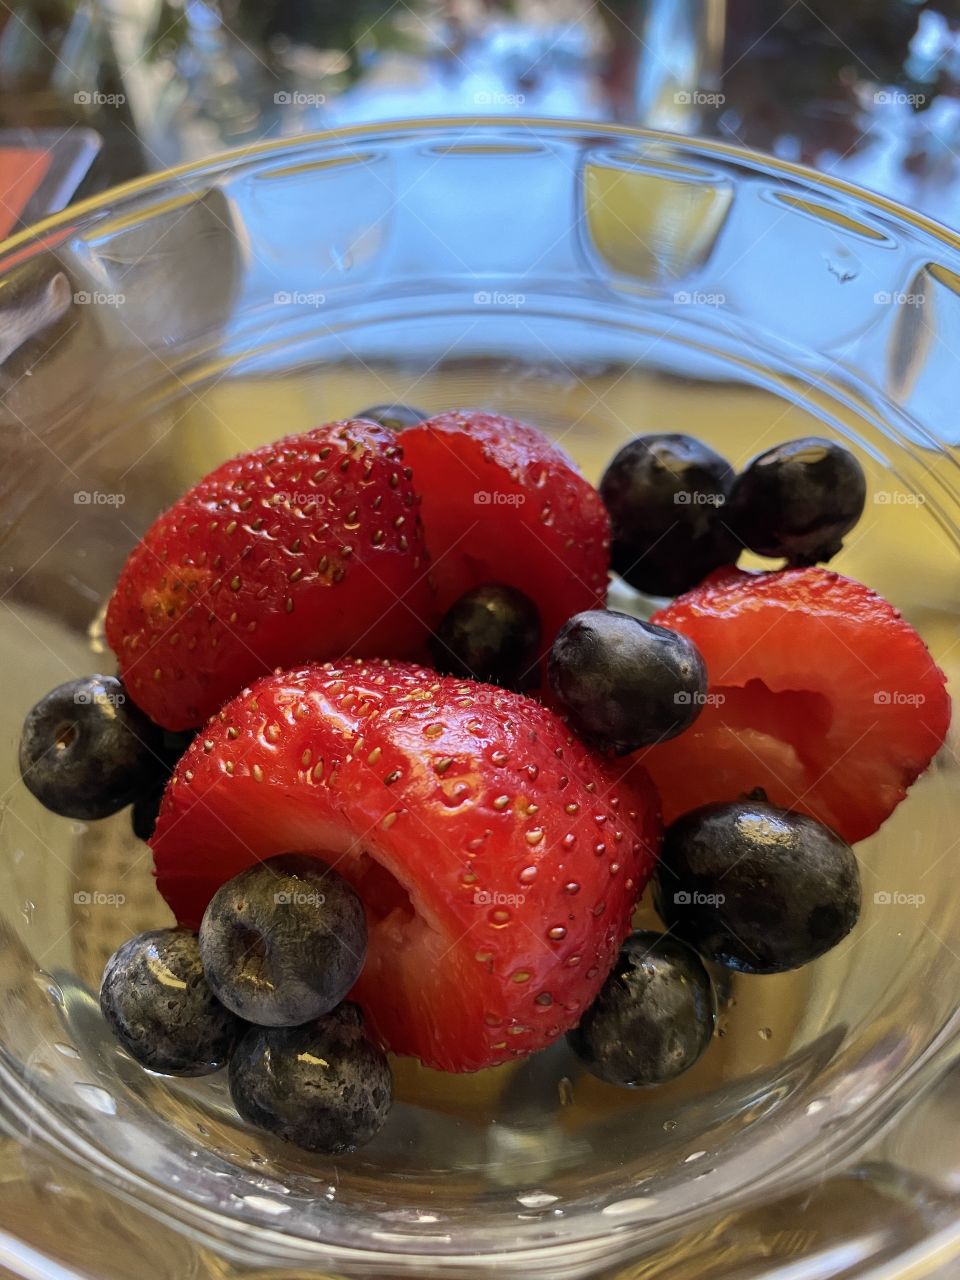 Strawberries red and blueberries blue in a transparent glass bowl for breakfast. Fruits.